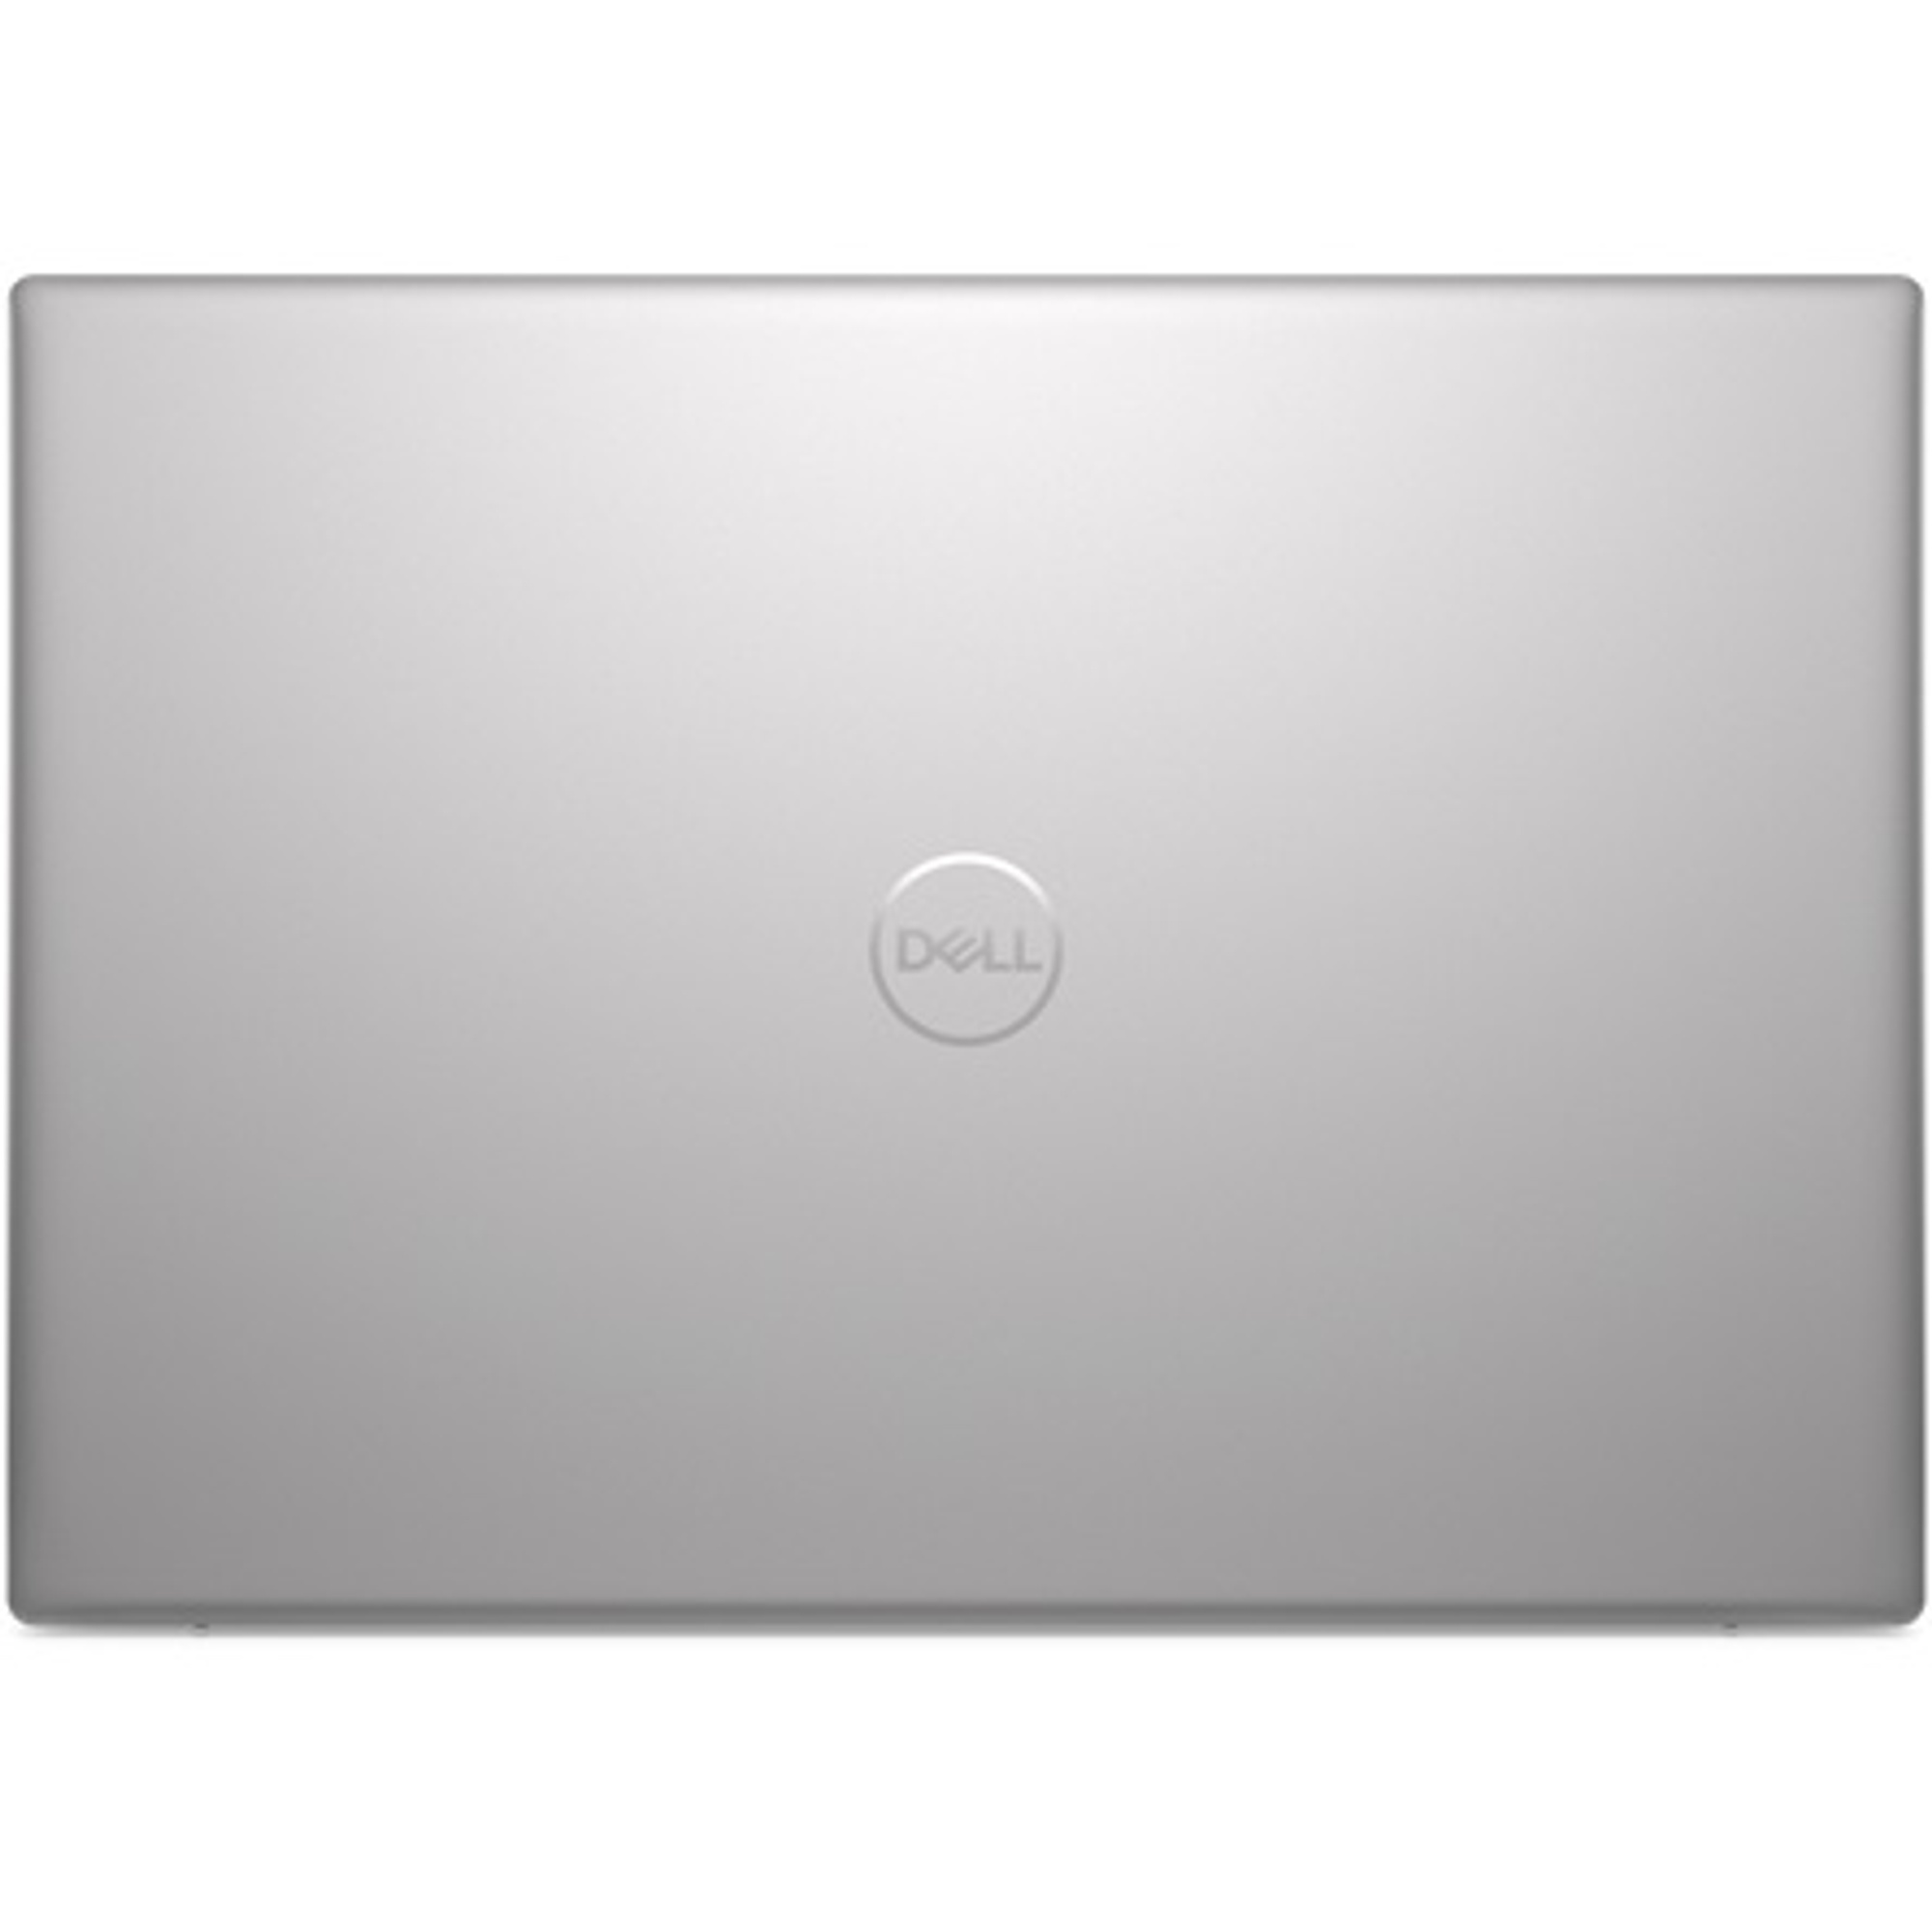 DELL 5635_336177 Laptop / Notebook 7